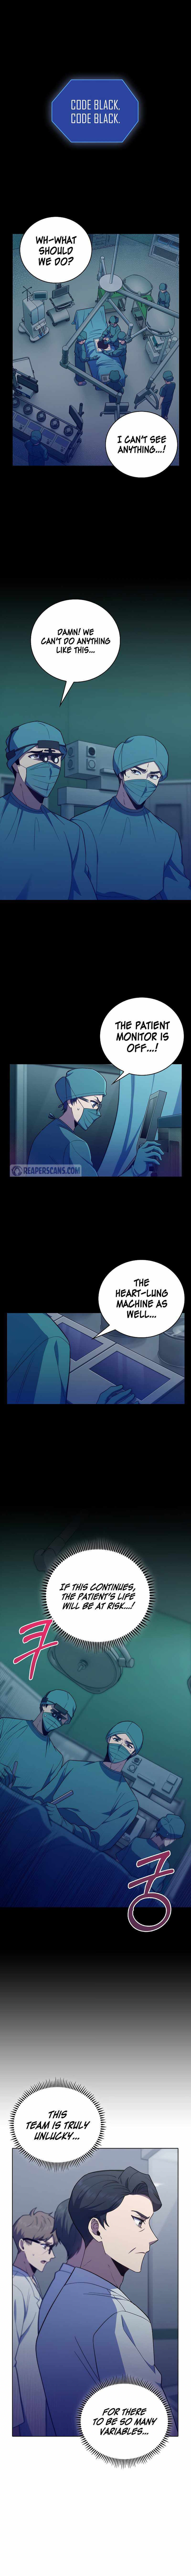 Level-Up Doctor (Manhwa) - Page 2